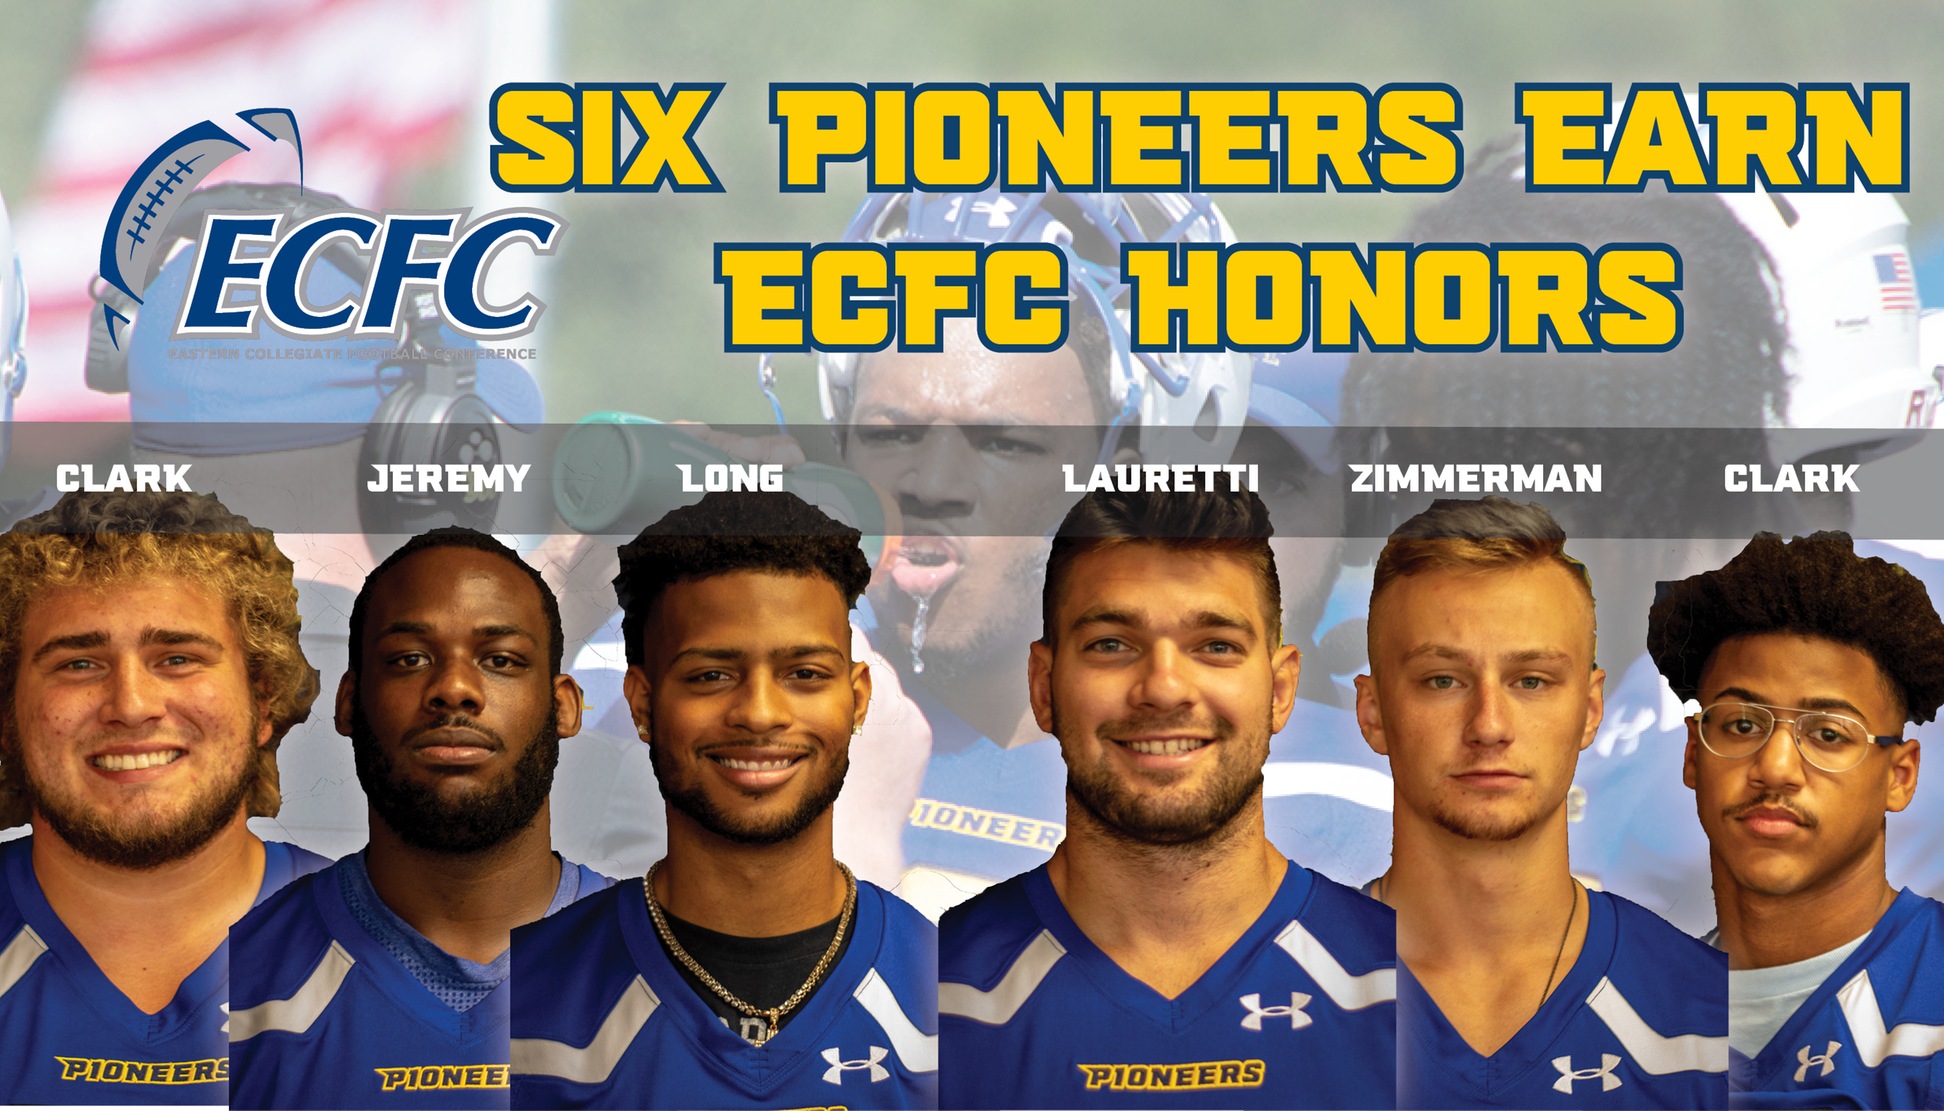 Six Pioneers Named All-ECFC